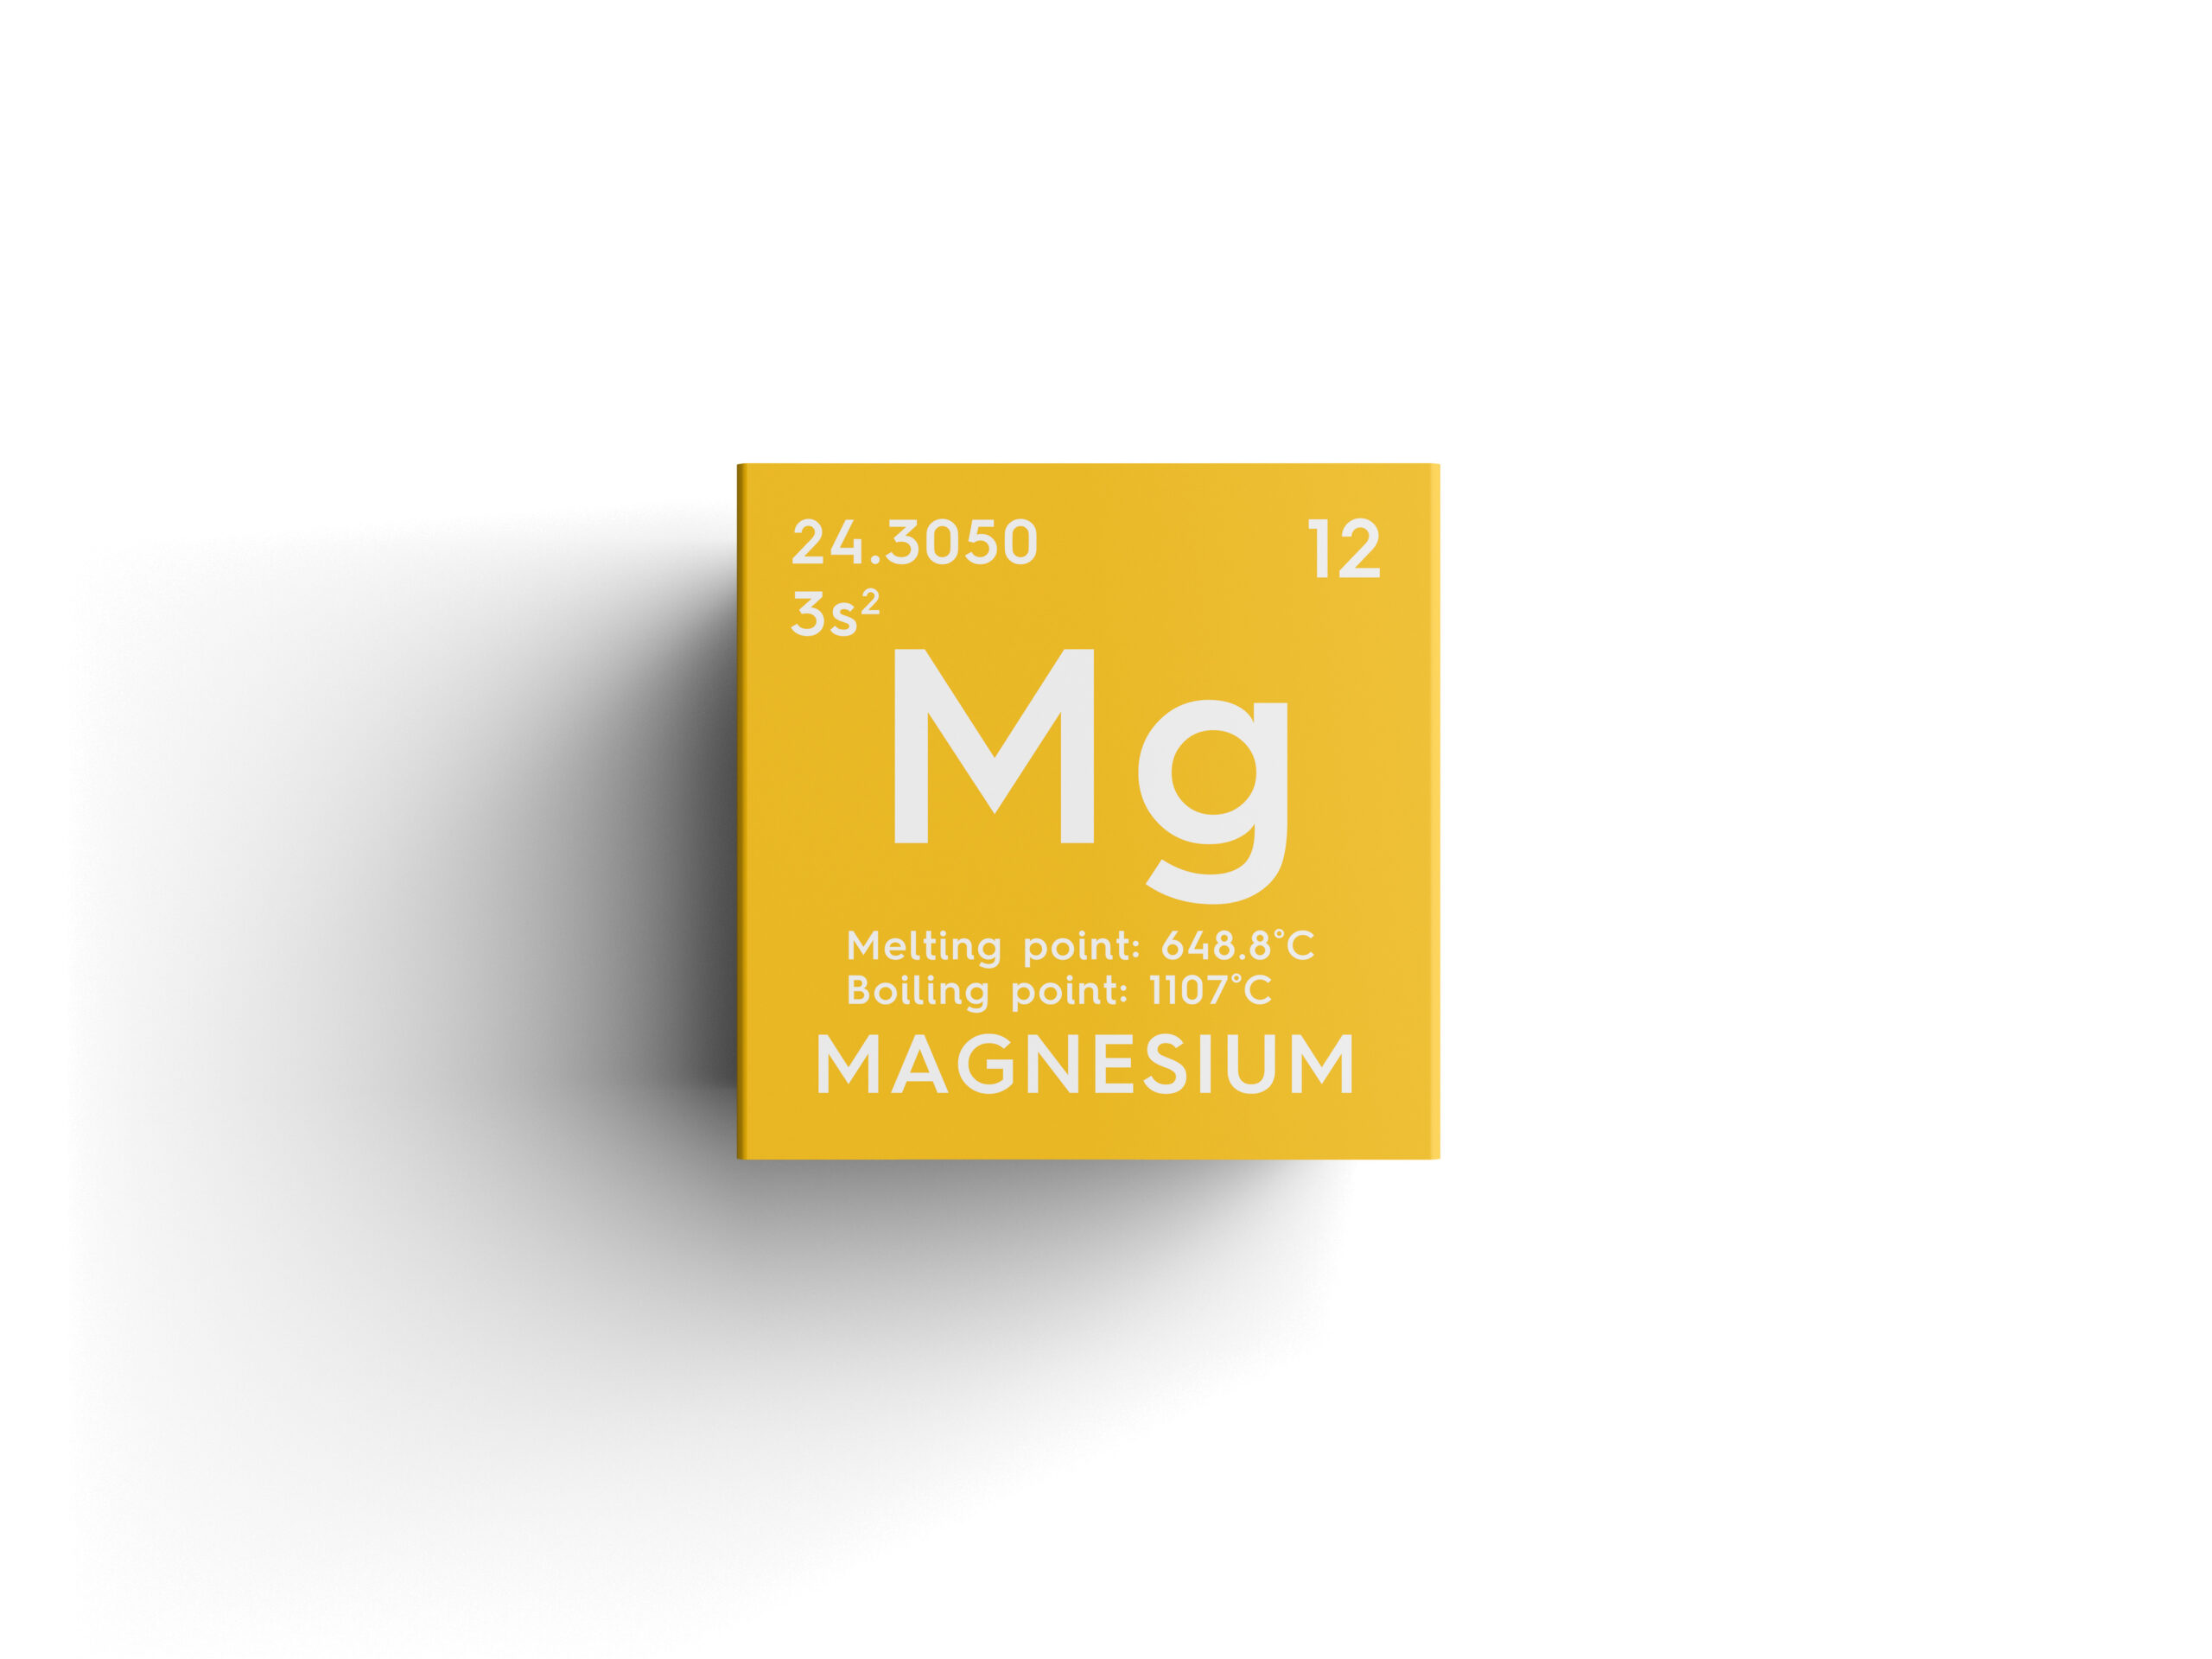 Magnesium on the Periodic Table of Elements